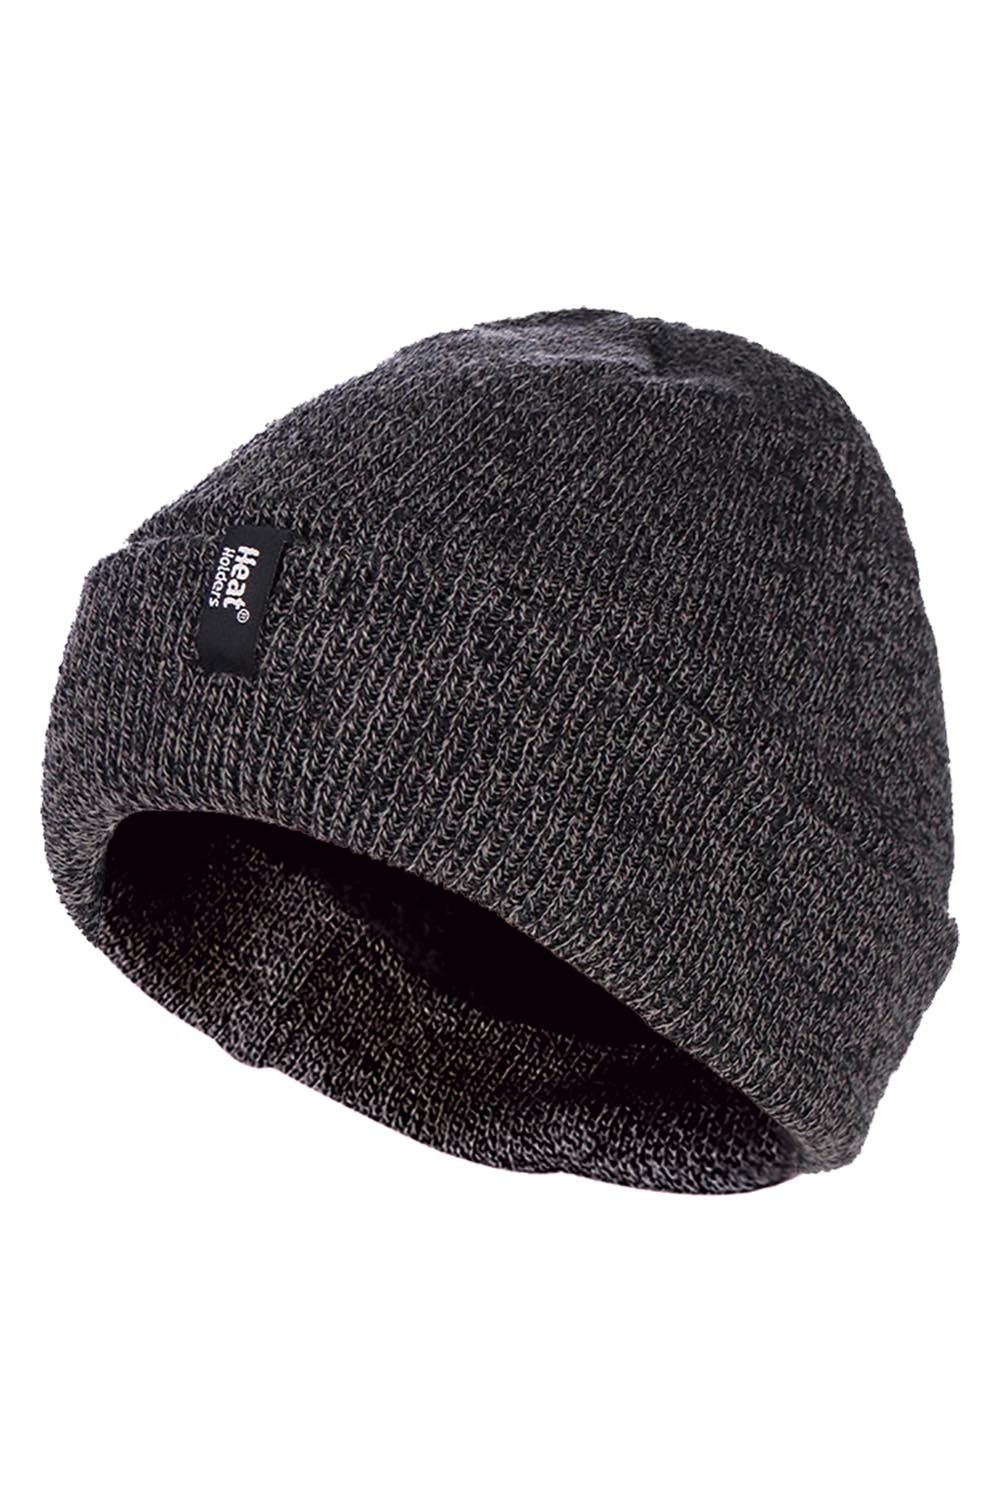 Mens Thermal Turn Over Beanie Hat -